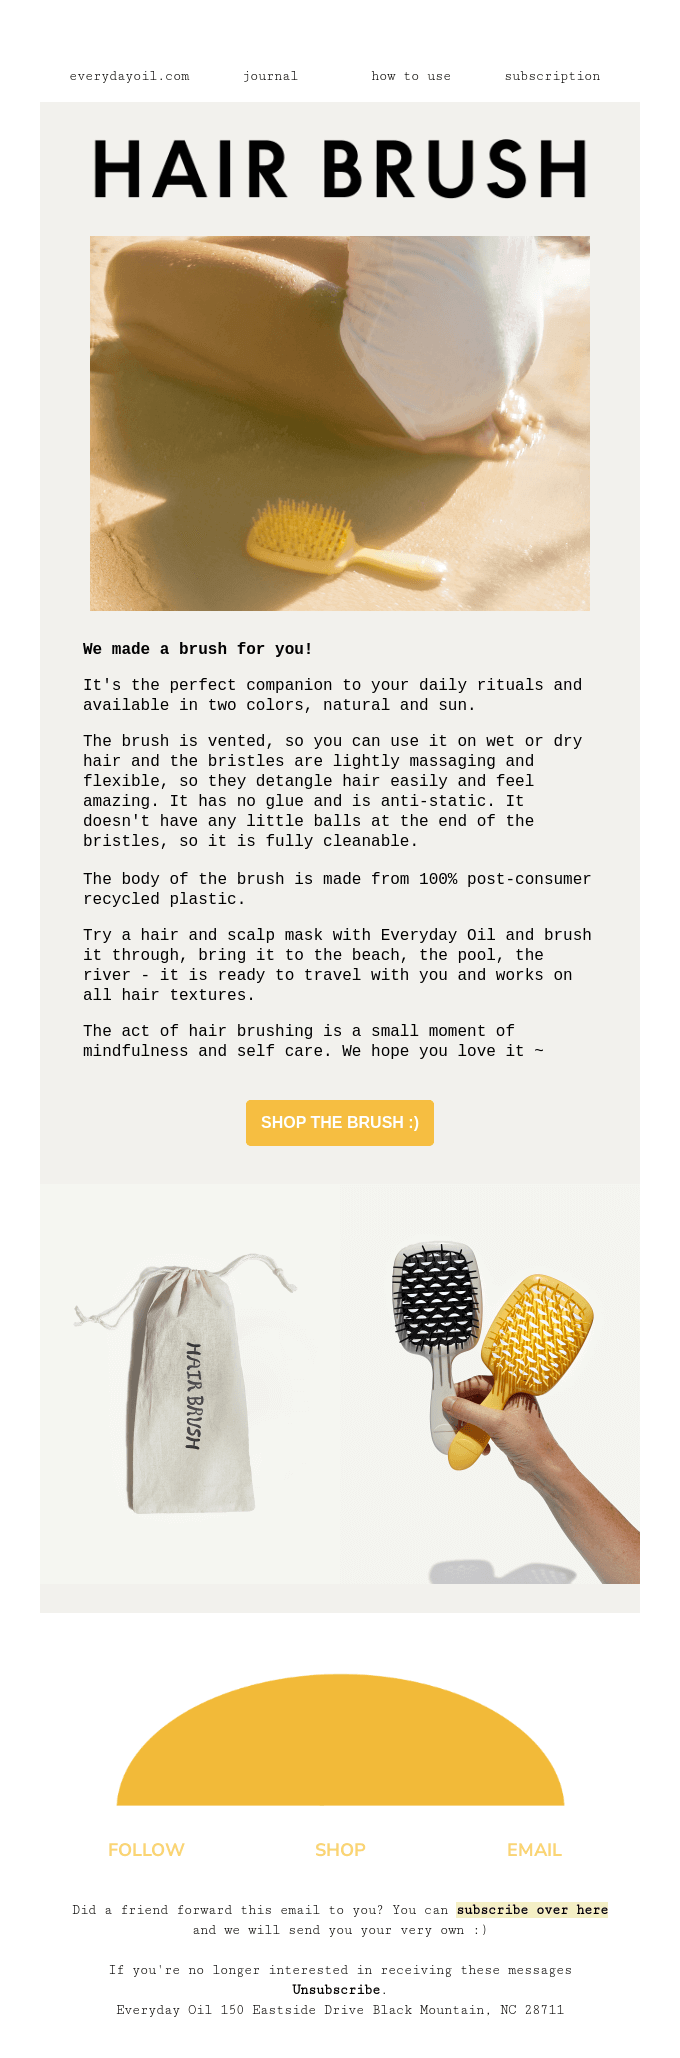 An email about the new hair brush detailing how it can be used and pointing out that it is great for mindfulness